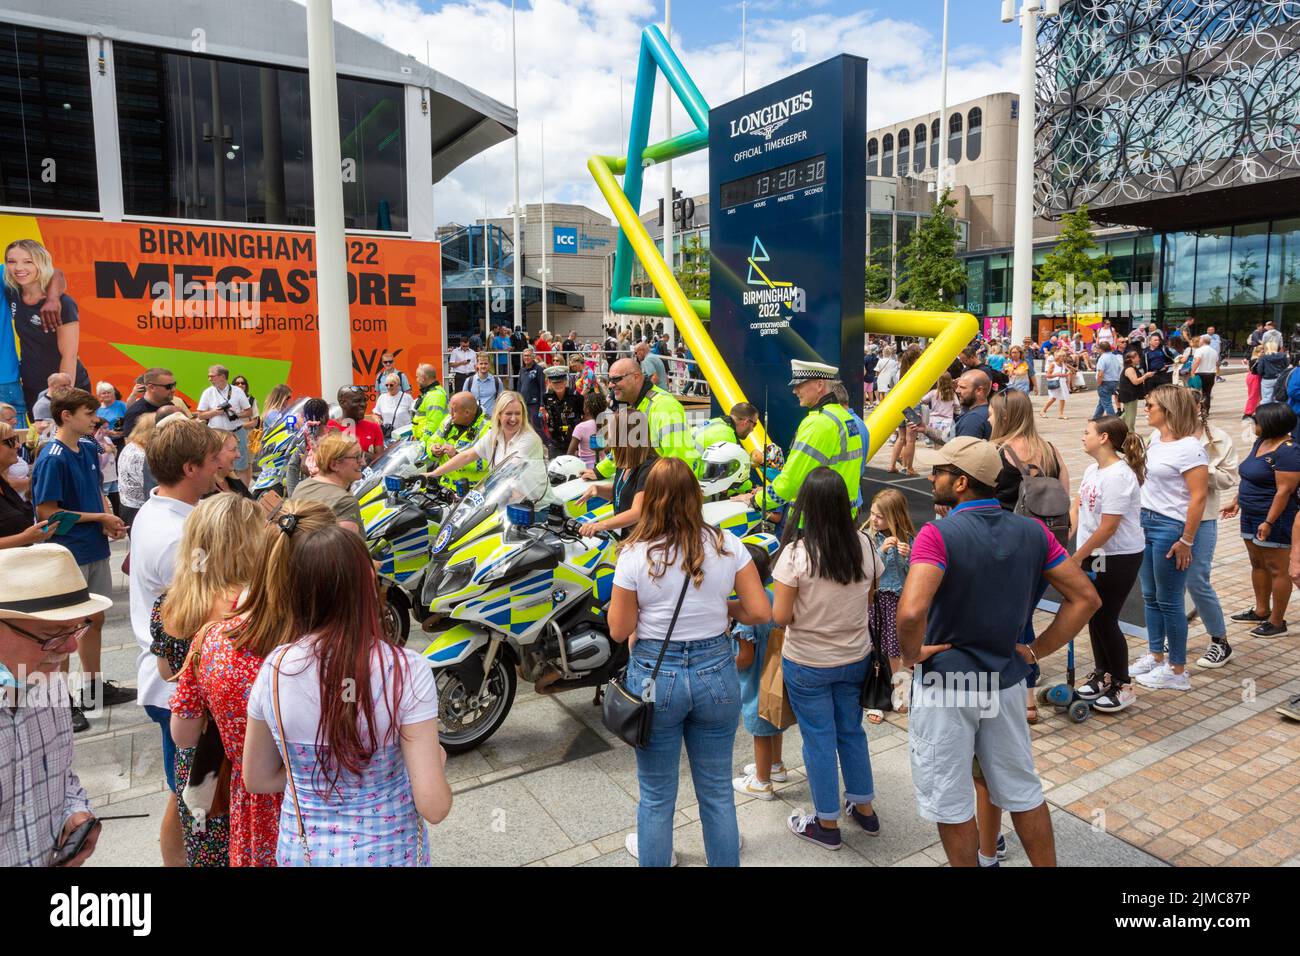 West Midlands Ploice with a static display of motorcycles, at the Commonwealth Games 2022 display, Birmingham, UK 2022 Stock Photo